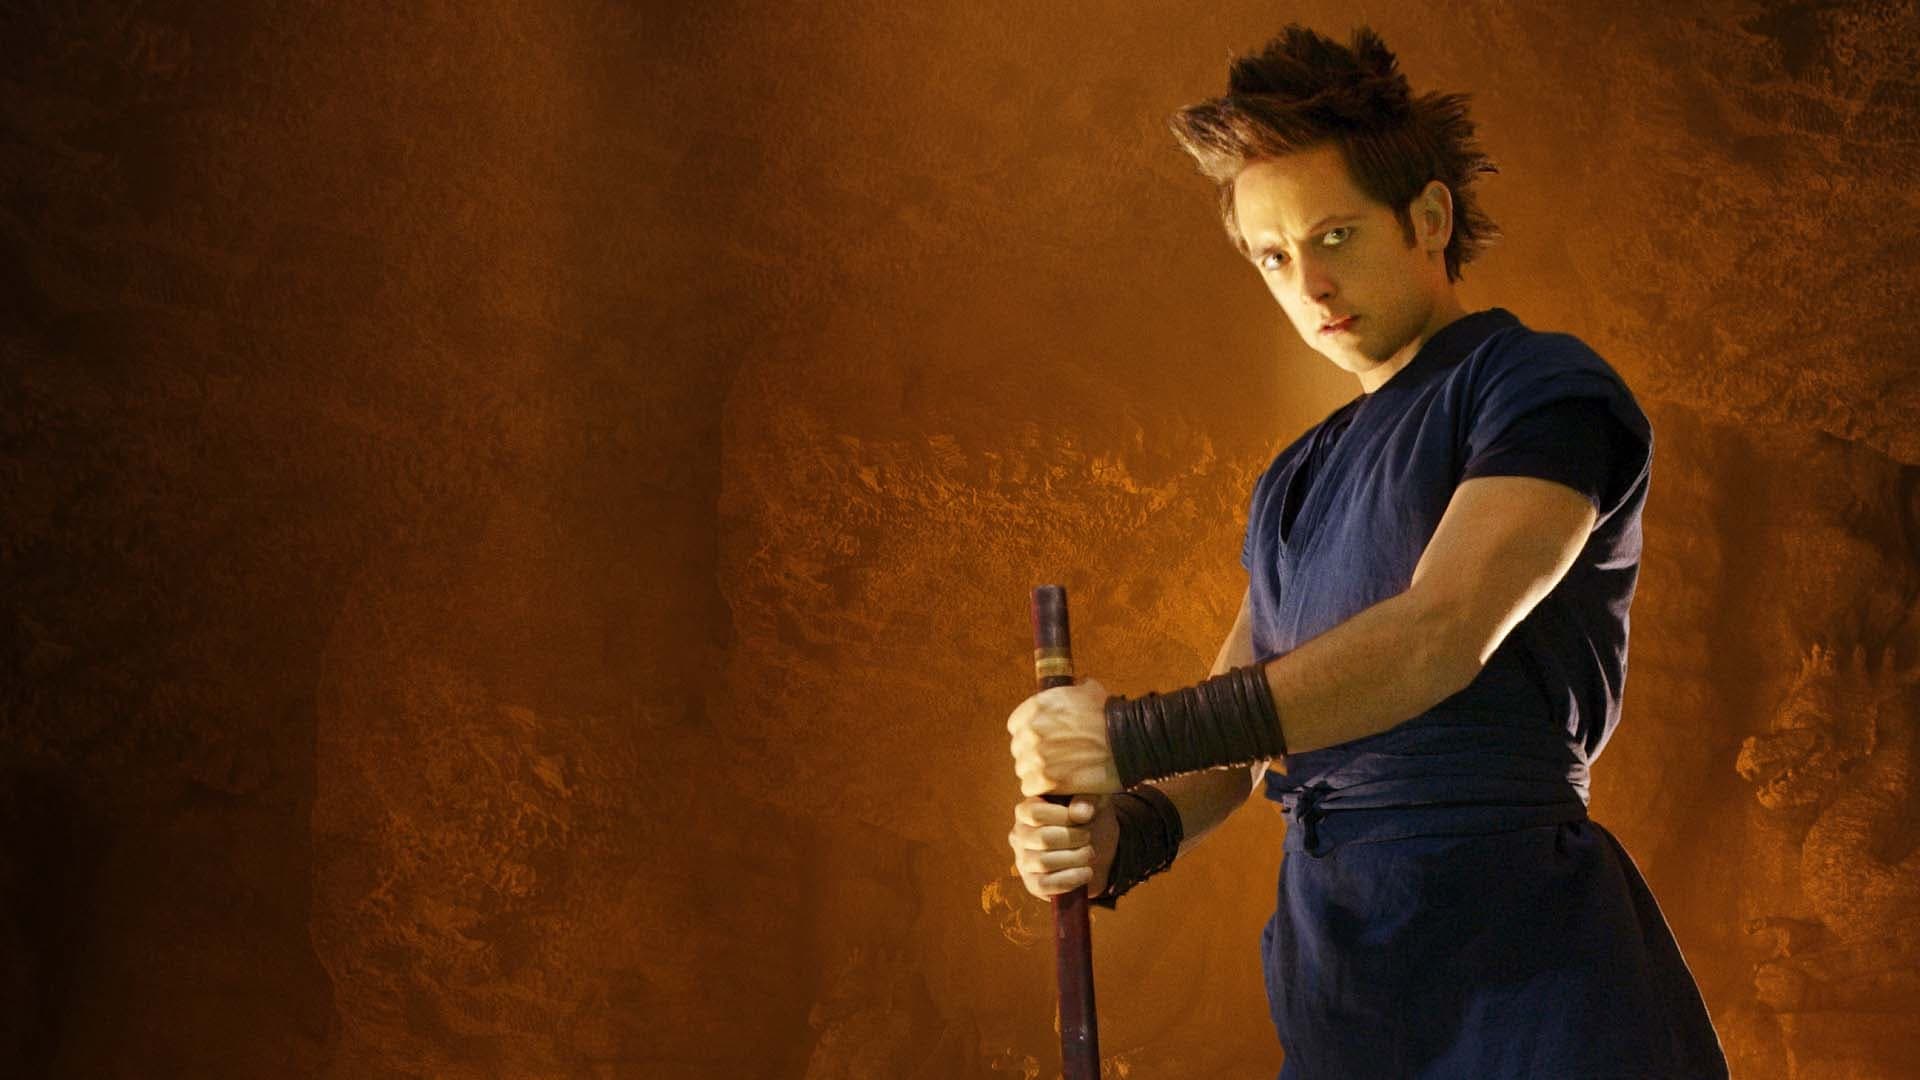 Dragonball Evolution streaming: where to watch online?